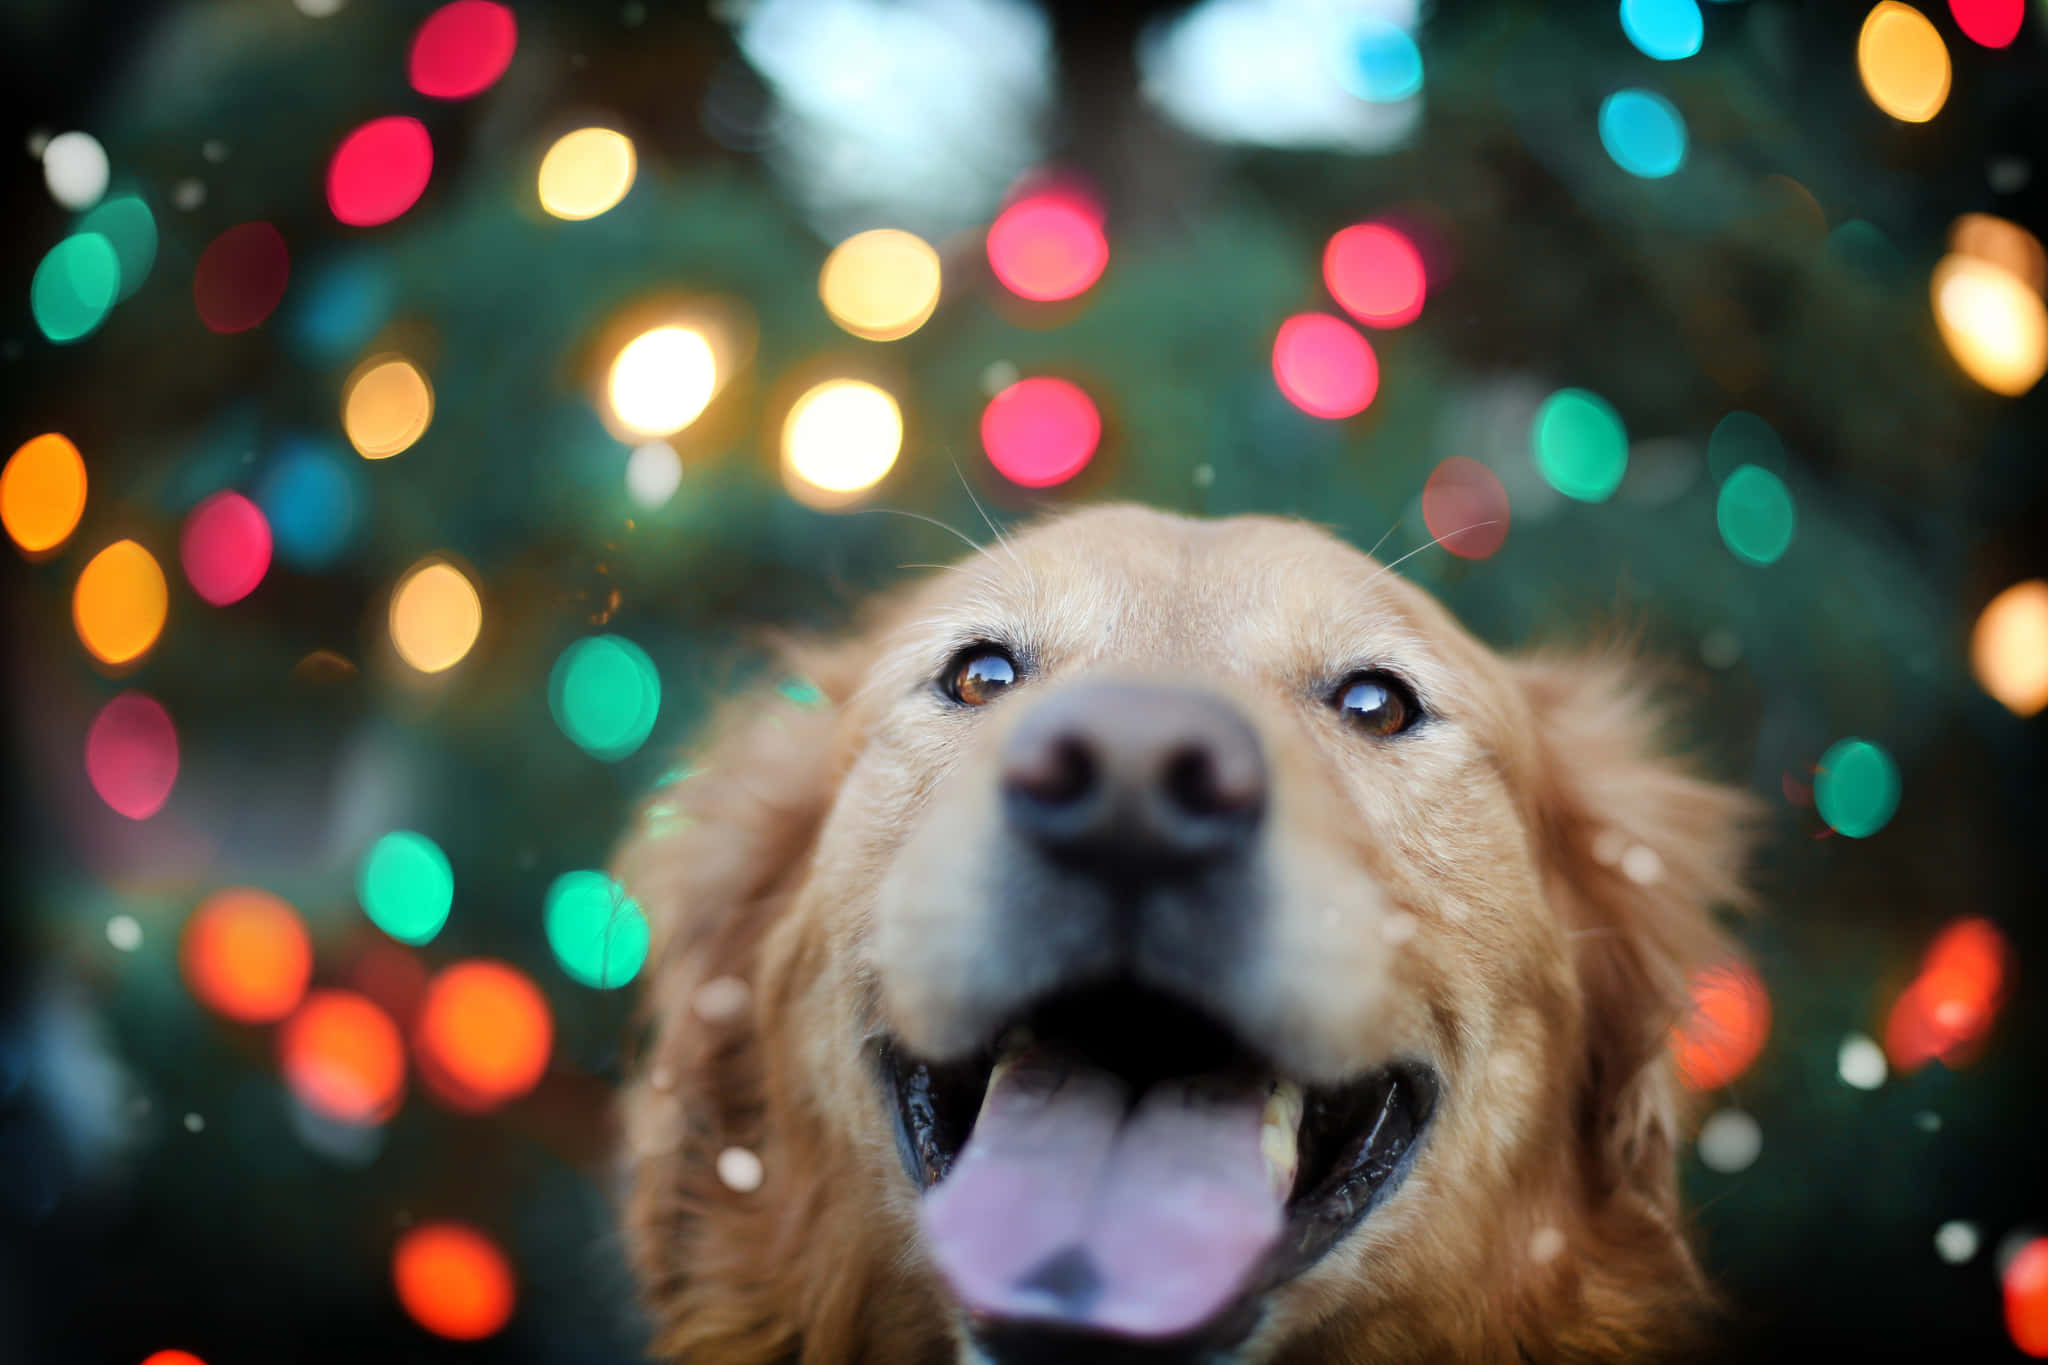 A happy and friendly Golden Retriever enjoying the day